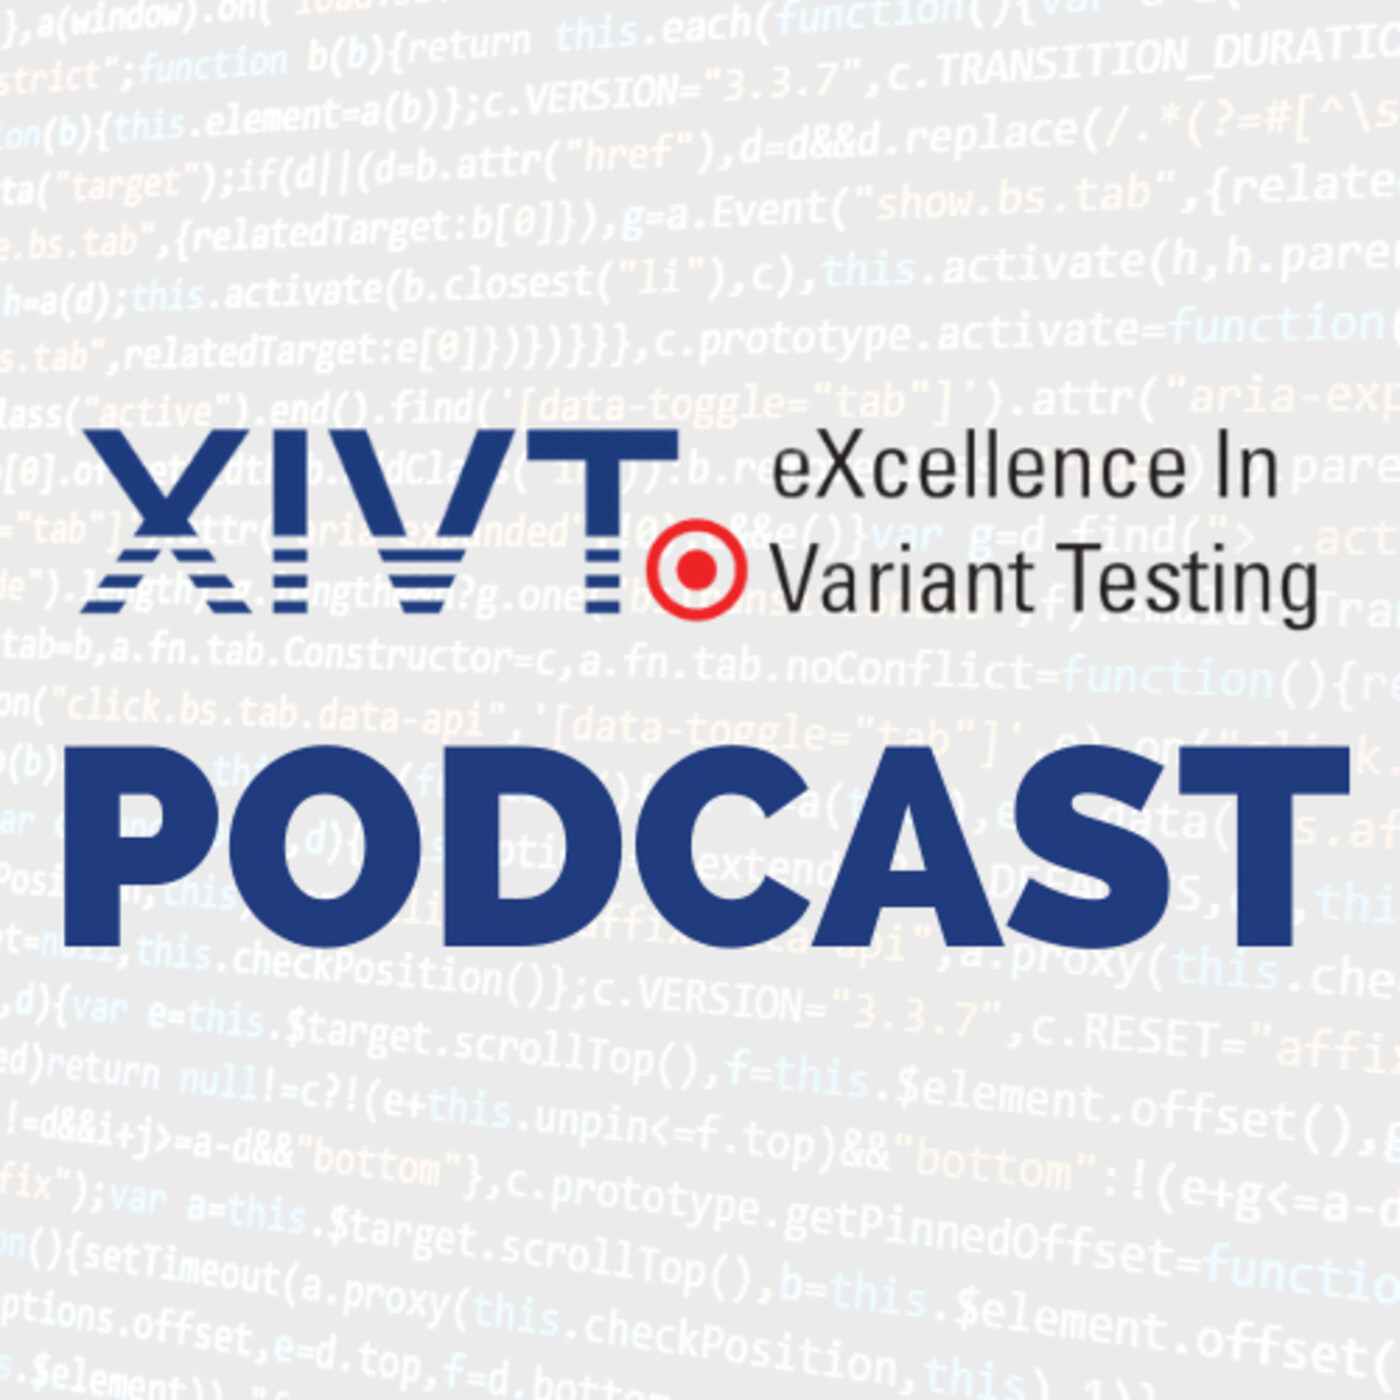 Interview with Mehrdad Saadatmand - VARIANT TESTING Podcast